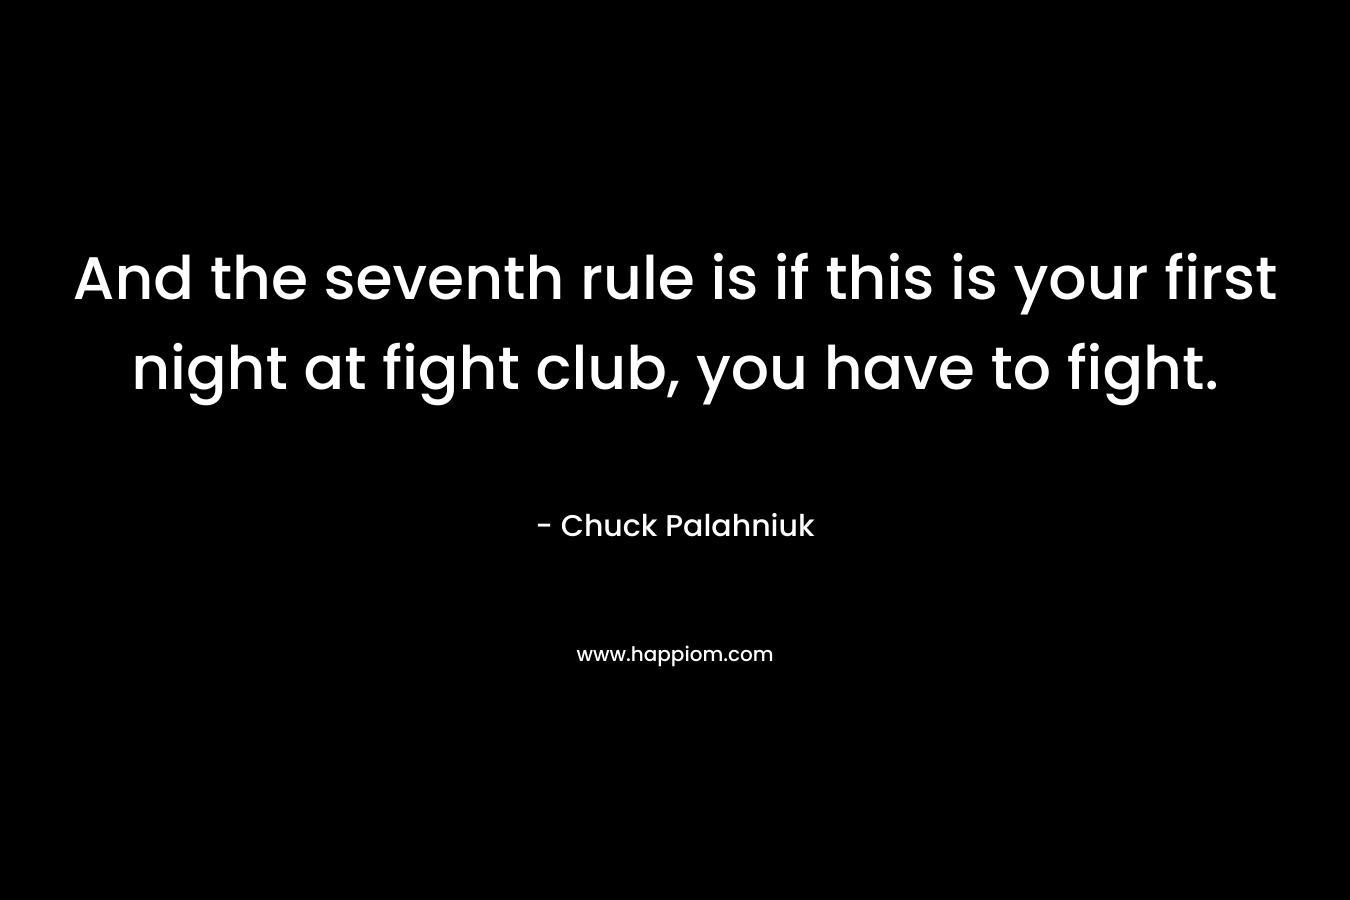 And the seventh rule is if this is your first night at fight club, you have to fight. – Chuck Palahniuk